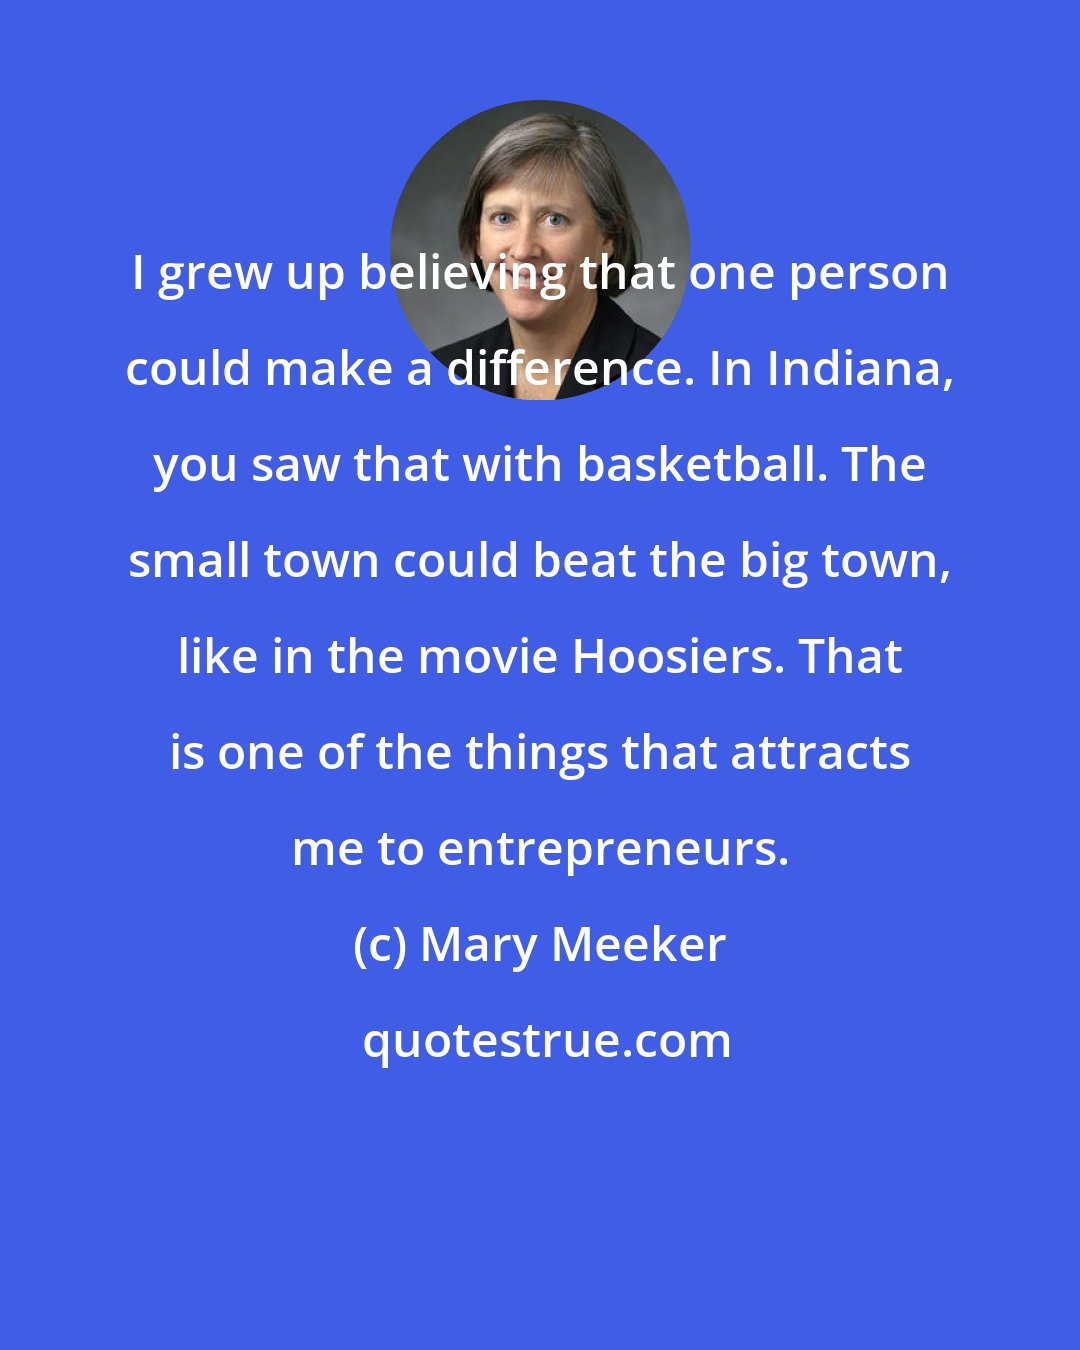 Mary Meeker: I grew up believing that one person could make a difference. In Indiana, you saw that with basketball. The small town could beat the big town, like in the movie Hoosiers. That is one of the things that attracts me to entrepreneurs.